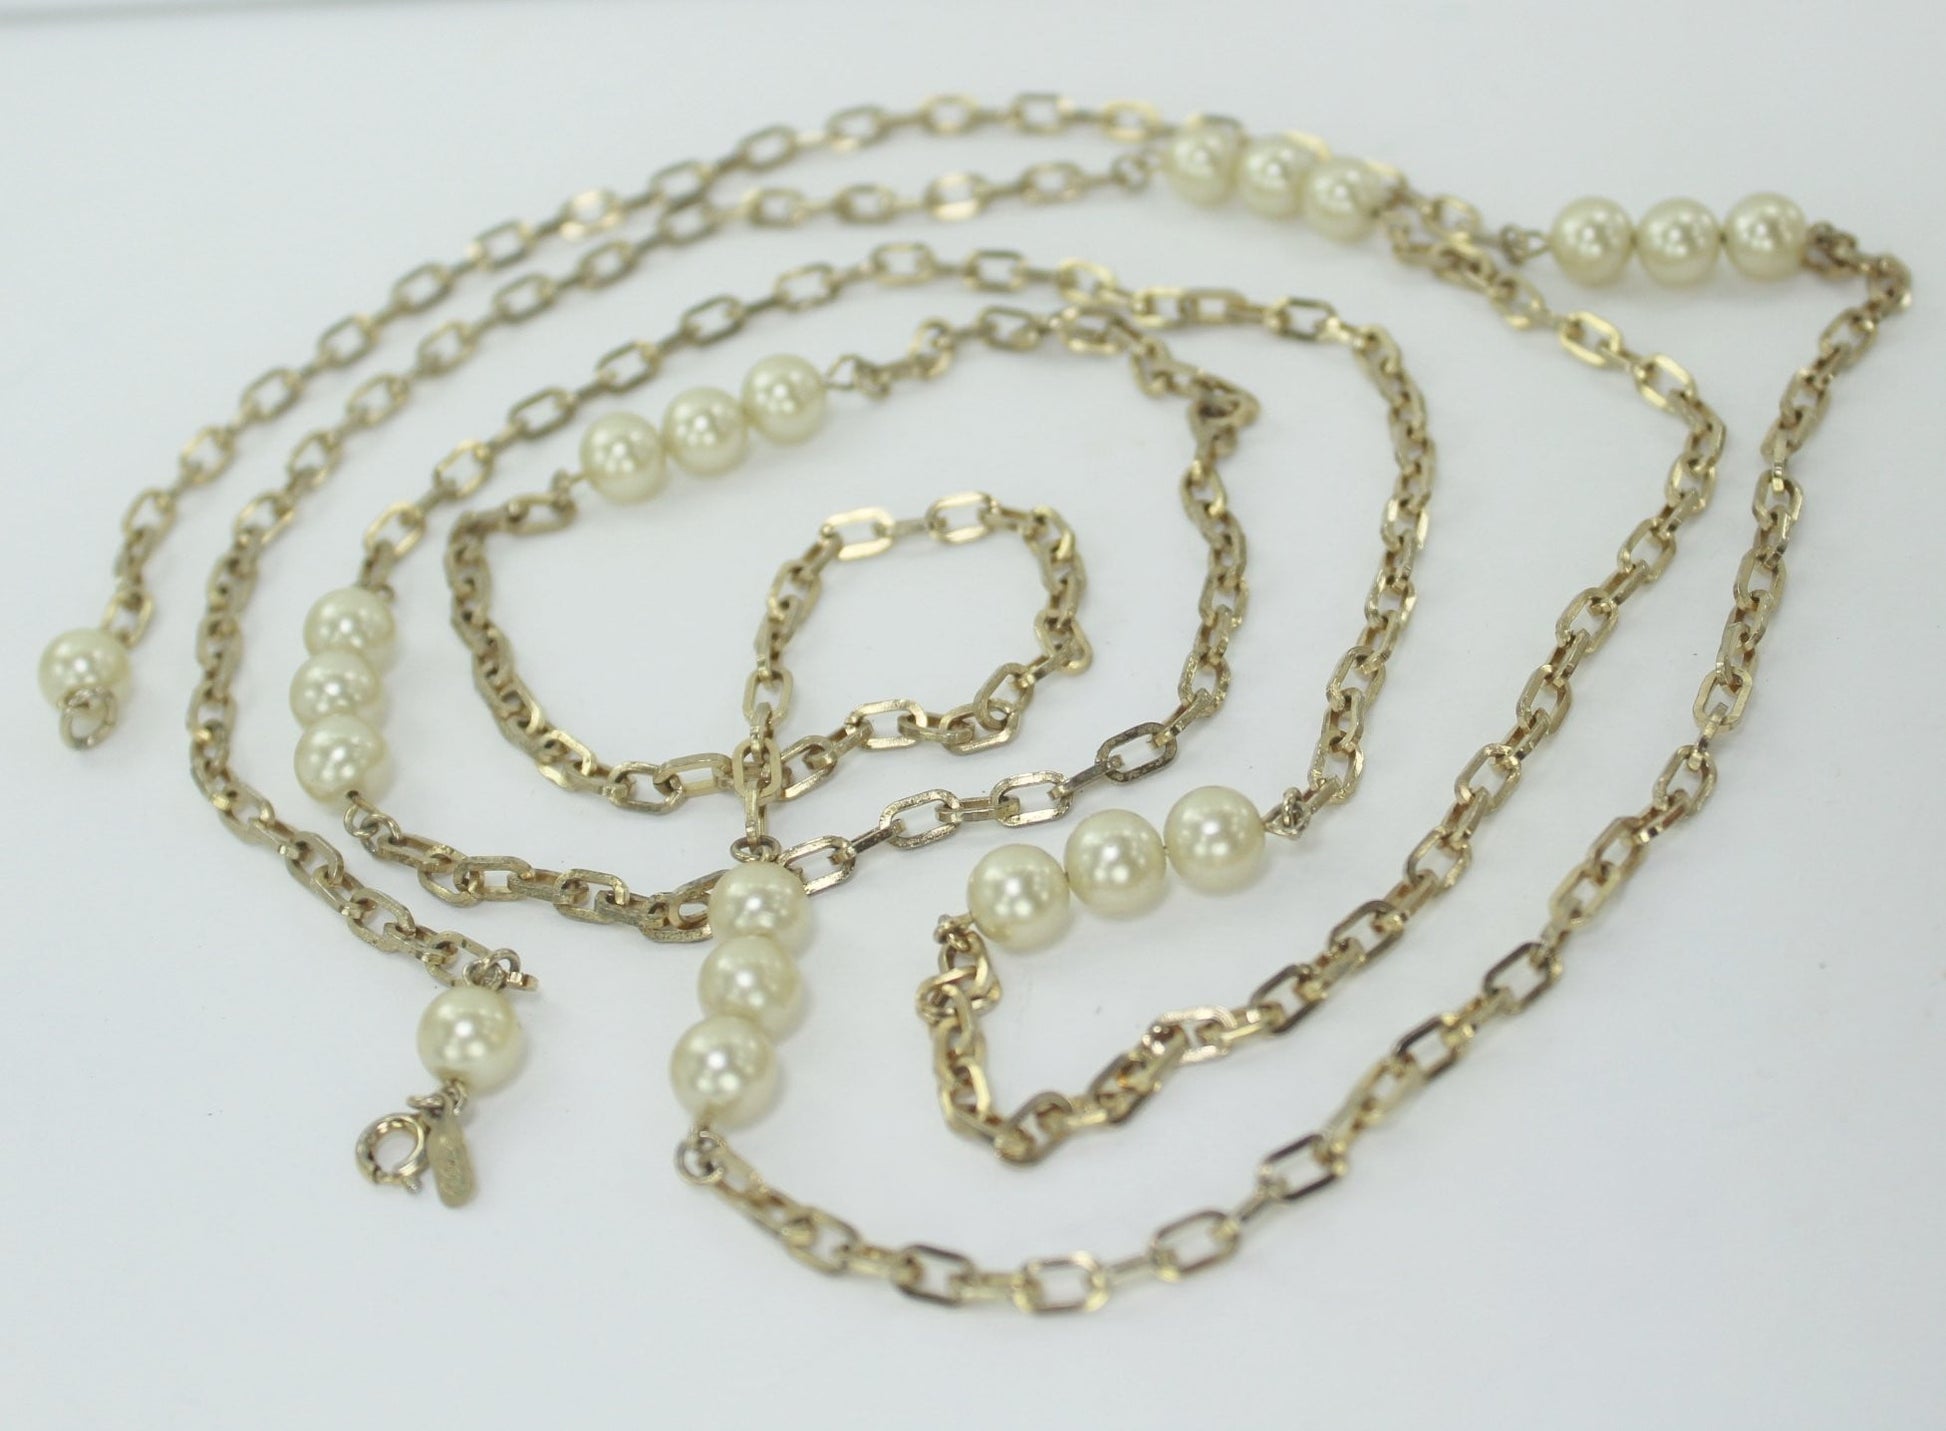 Vintage ALICE Caviness Necklace Long 29" Chain Triple Pearls Opera Length wrap necklace